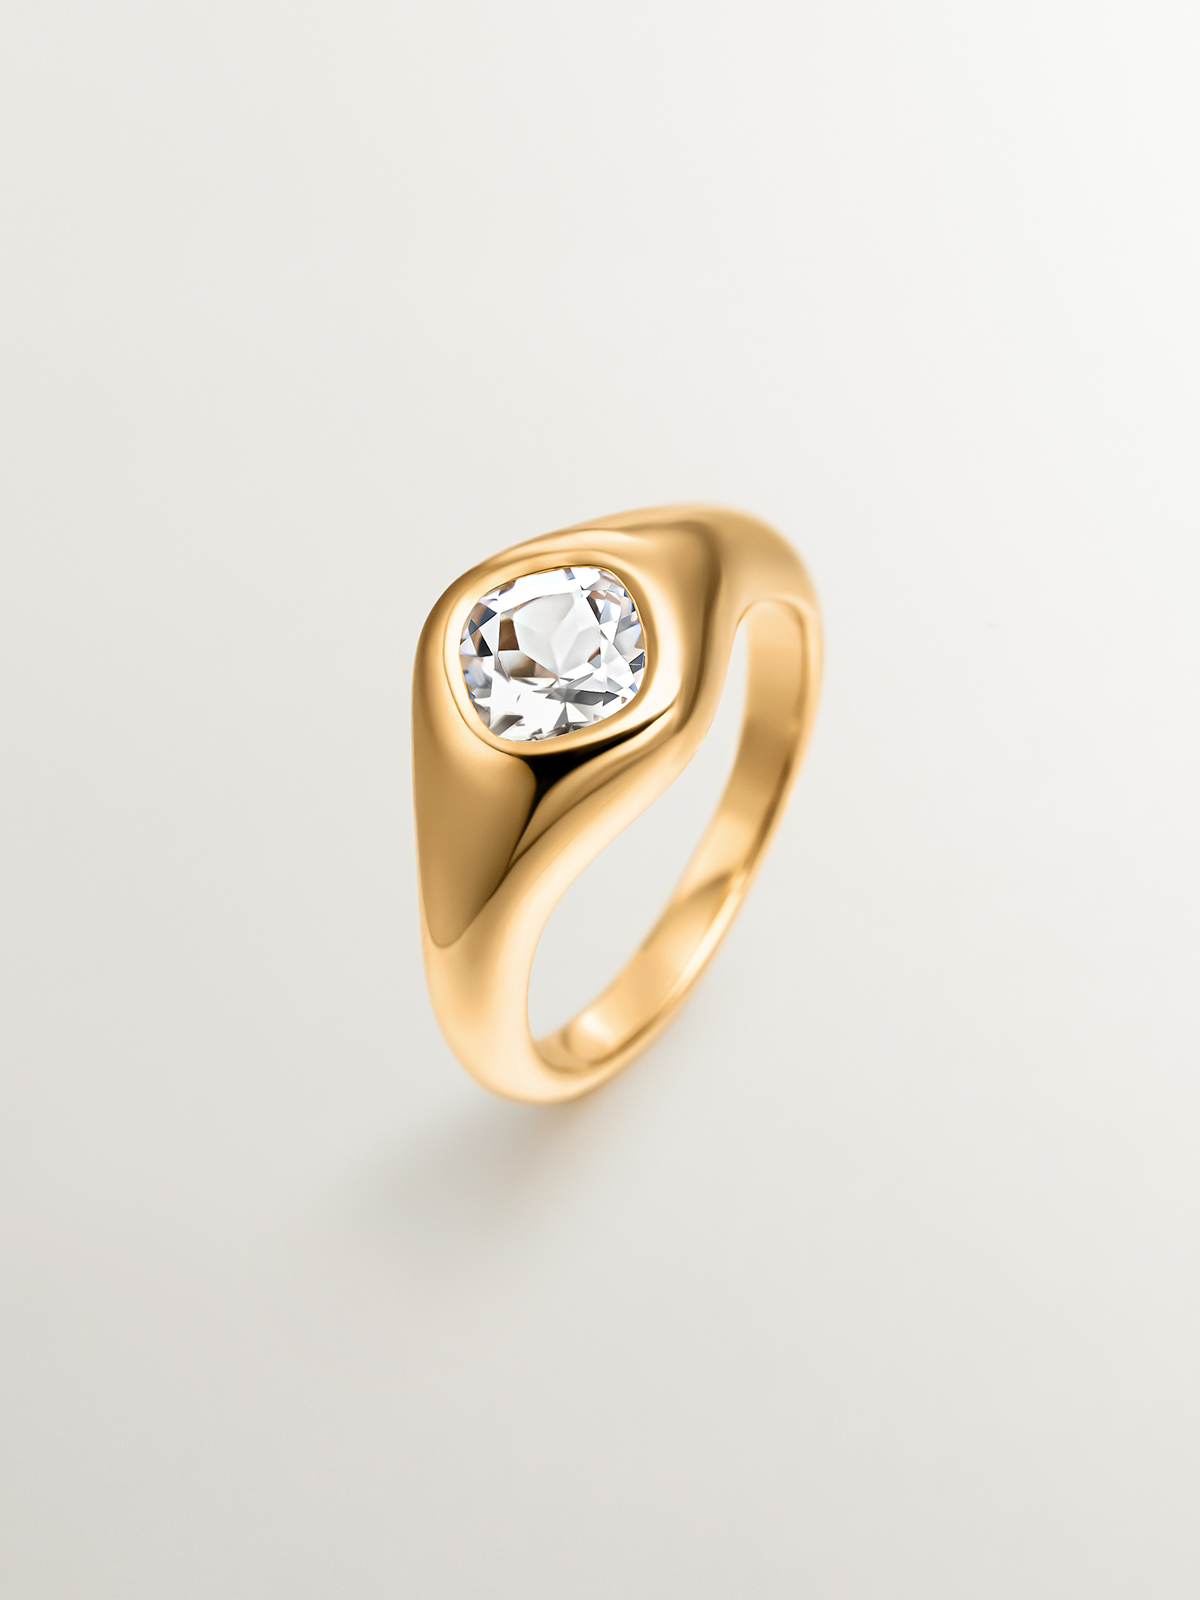 18K yellow gold plated 925 silver signet ring with white quartz